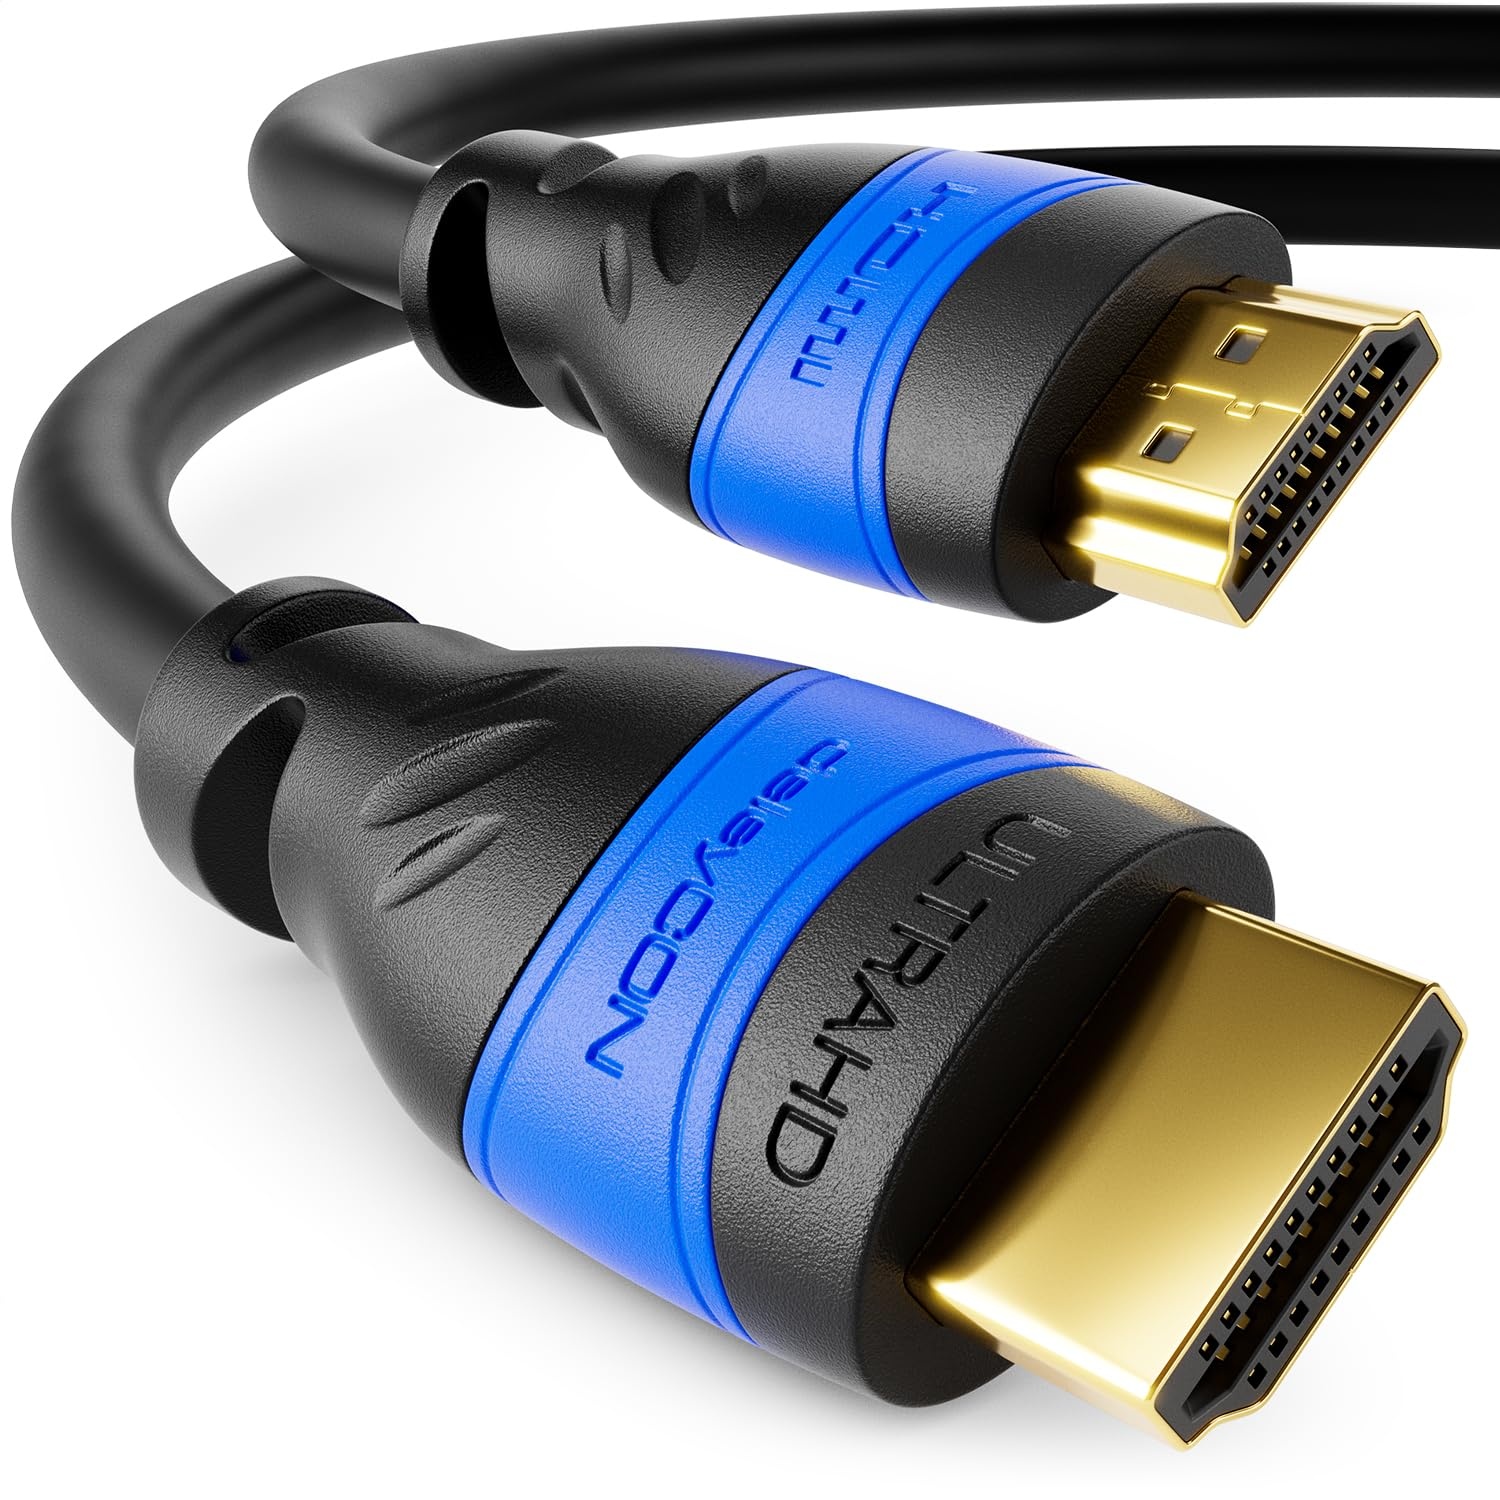 deleyCON 4m HDMI Kabel 2.0a/b - High Speed mit Ethernet - UHD 2160p 4K@60Hz 4:4:4 HDR HDCP 2.2 ARC CEC Ethernet 18Gbps 3D Full HD 1080p Dolby - Schwarz